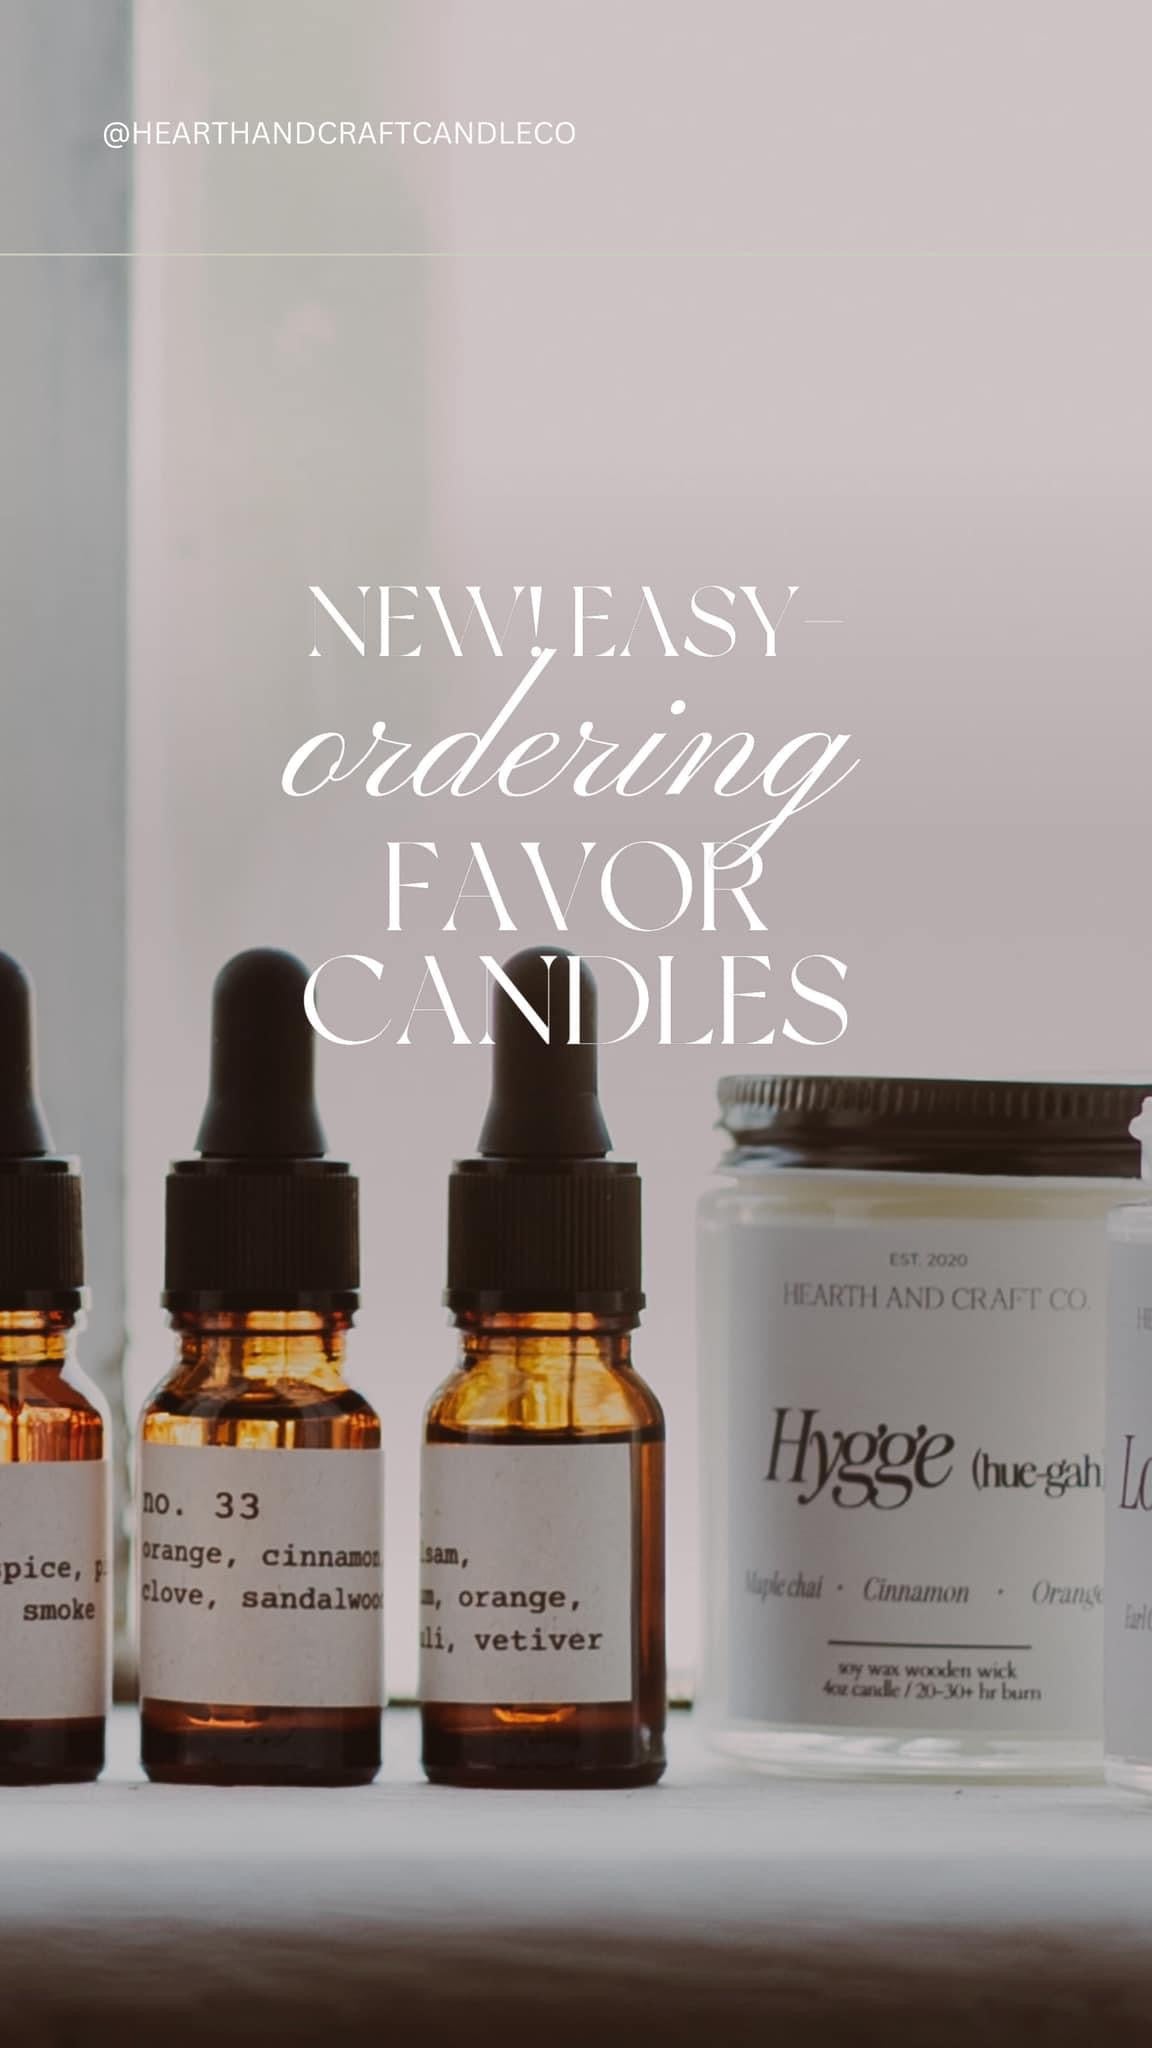 Easy Ordering ~ Private Label Candles / Event Favor Candles / Special Occasion / Retail